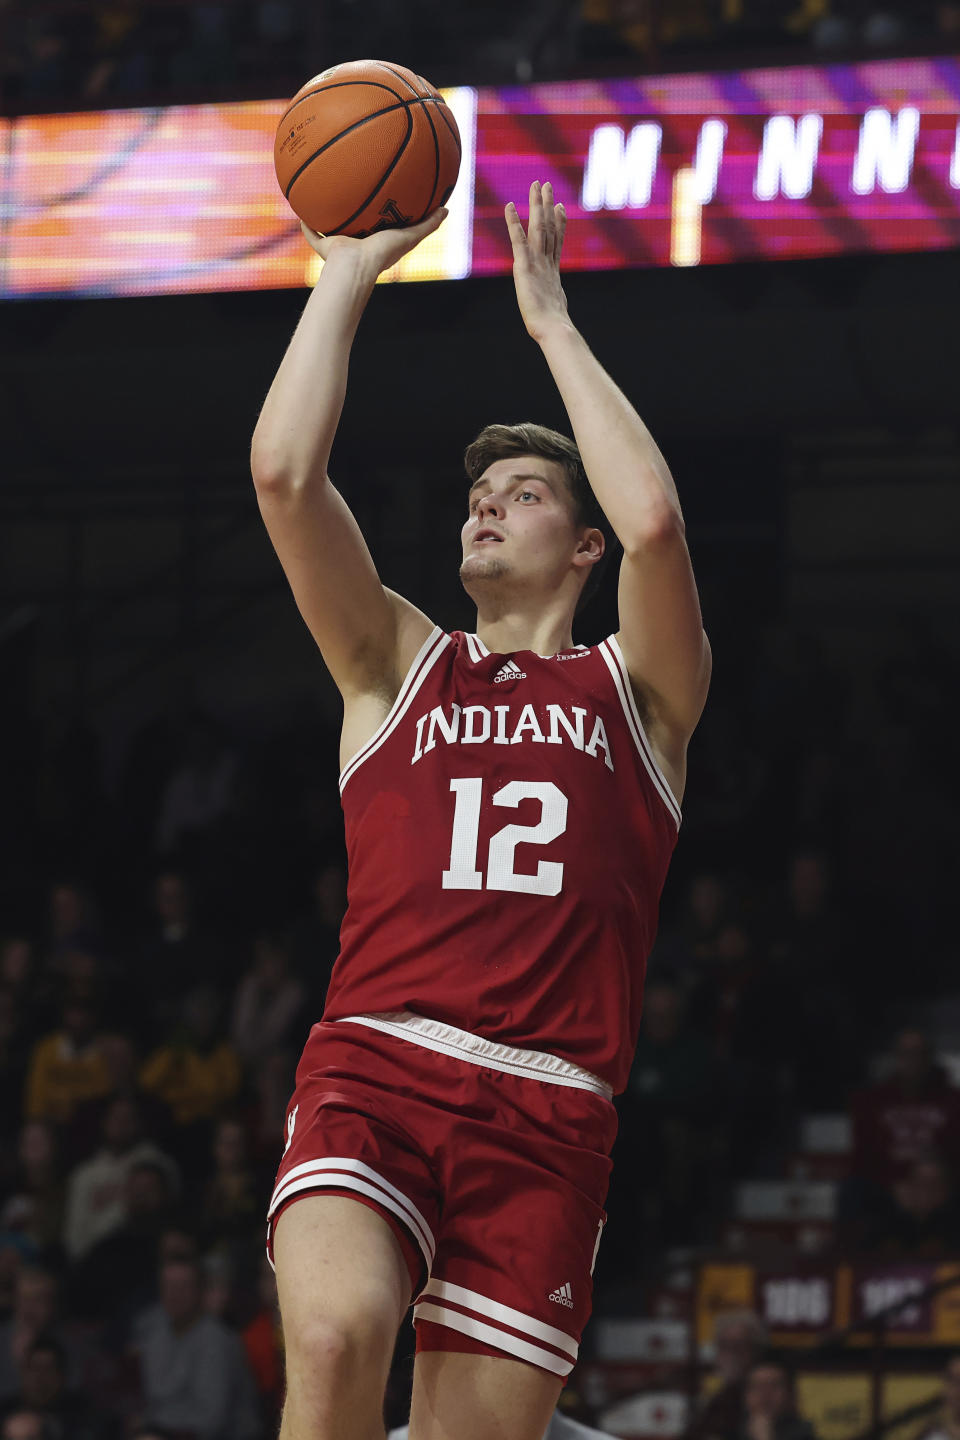 Indiana forward Miller Kopp (12) shoots during the second half of the team's NCAA college basketball game against Minnesota, Wednesday, Jan. 25, 2023, in Minneapolis. Indiana won 61-57. (AP Photo/Stacy Bengs)